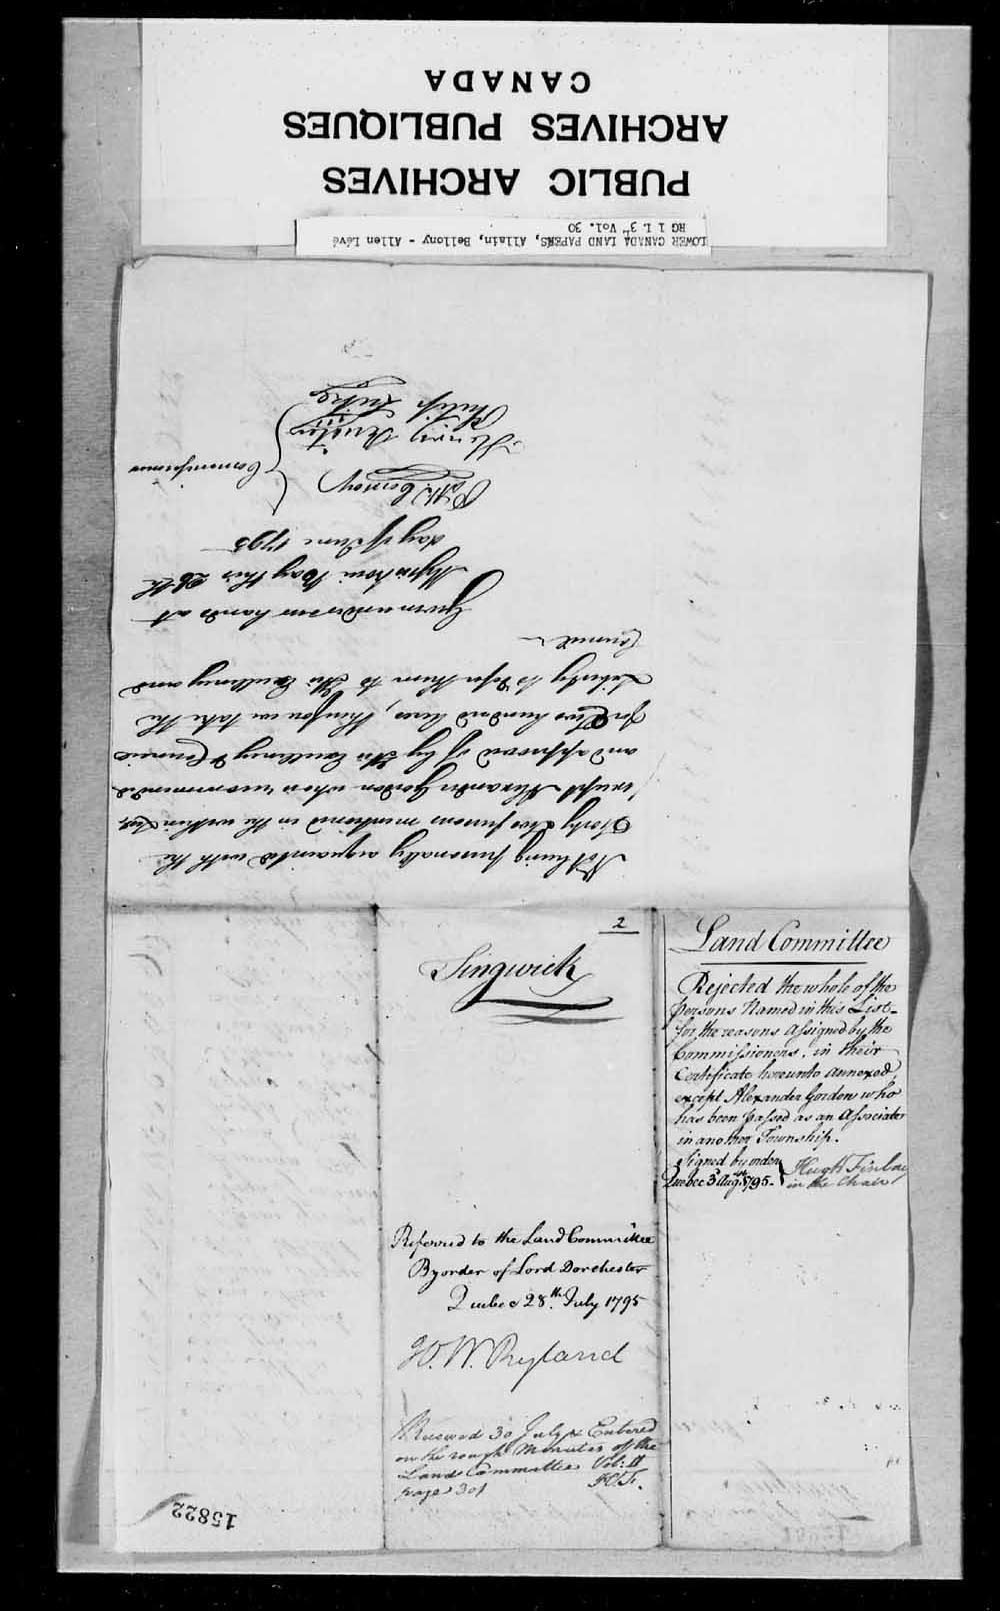 Digitized page of  for Image No.: e003702652